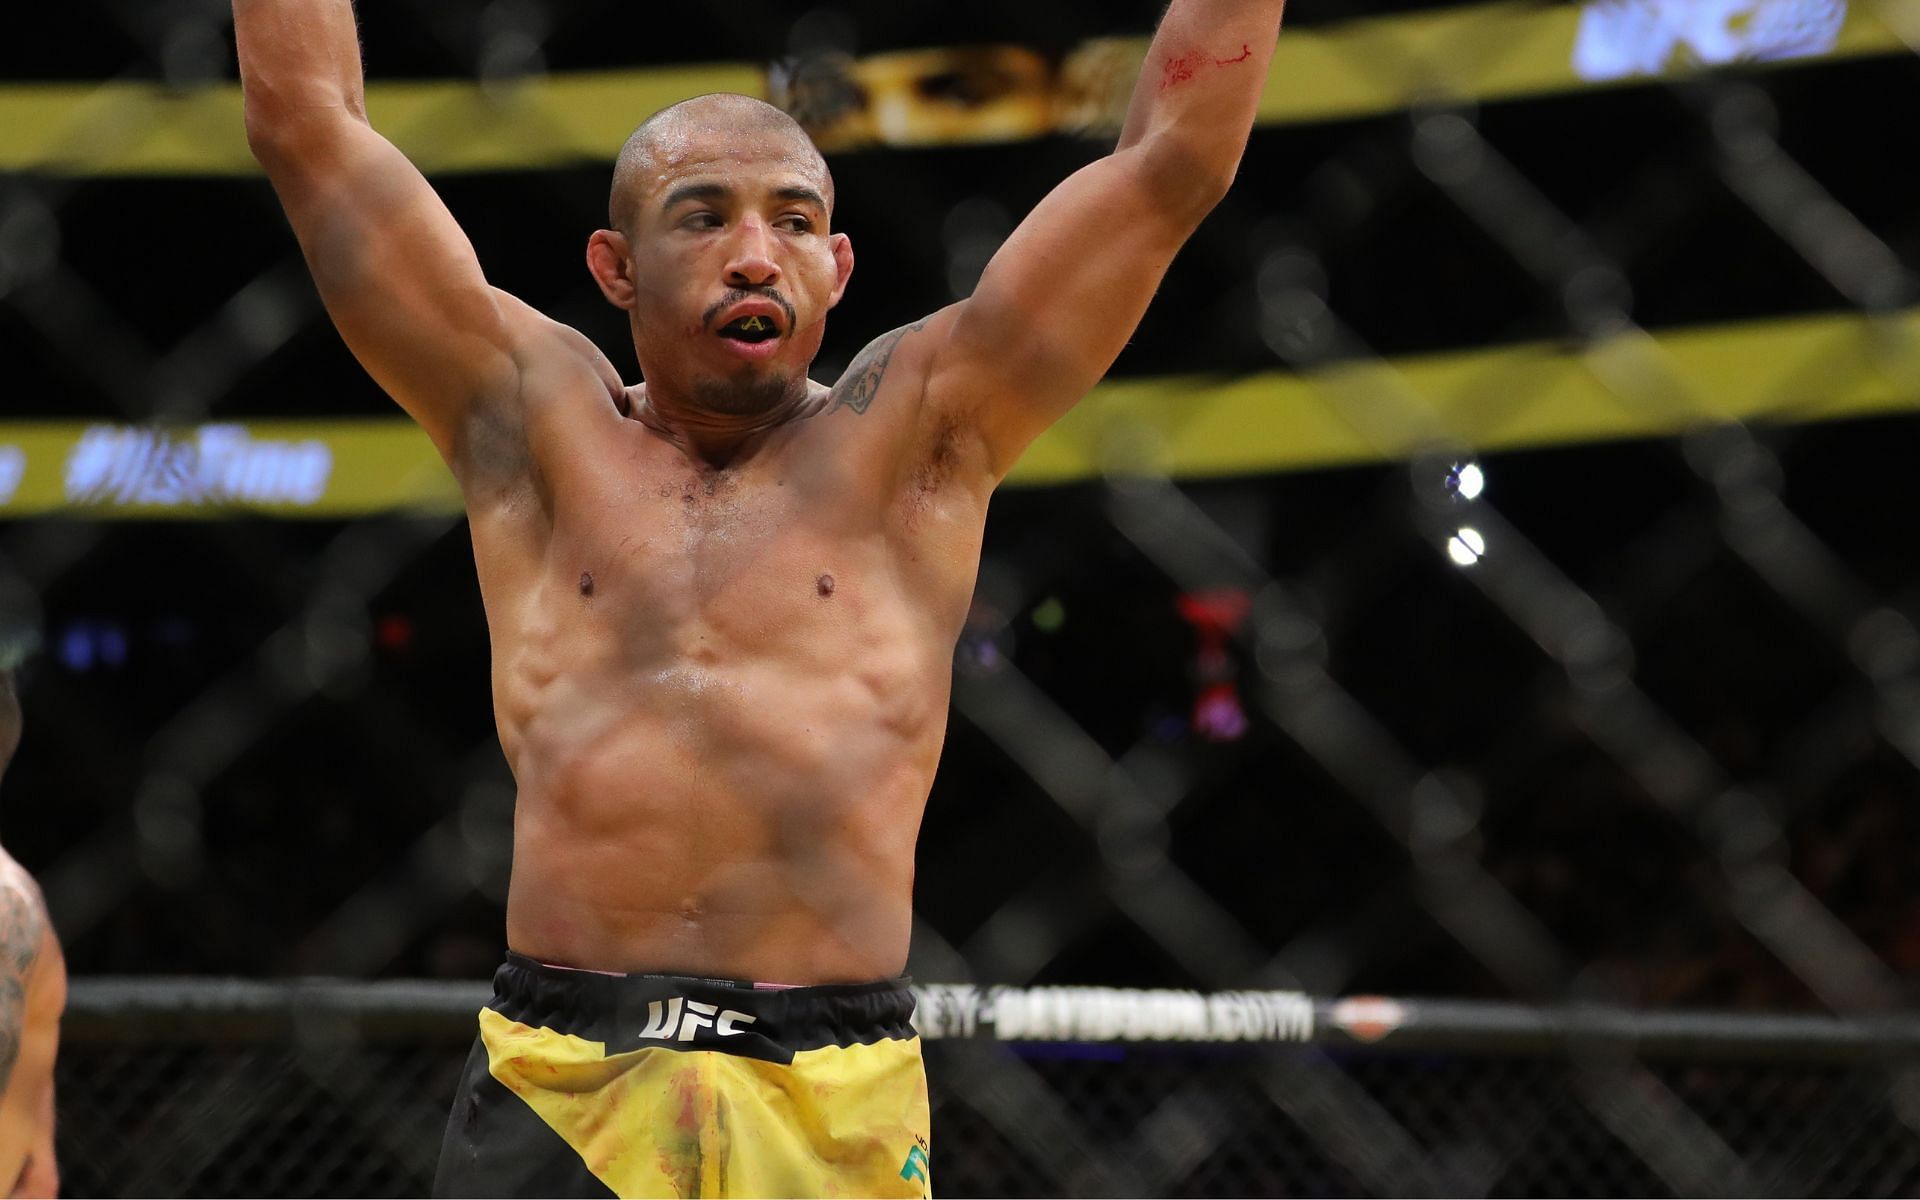 Jose Aldo ended his MMA retirement and returned to the octagon with a vintage performance at UFC 301 [Image courtesy: Getty Images]